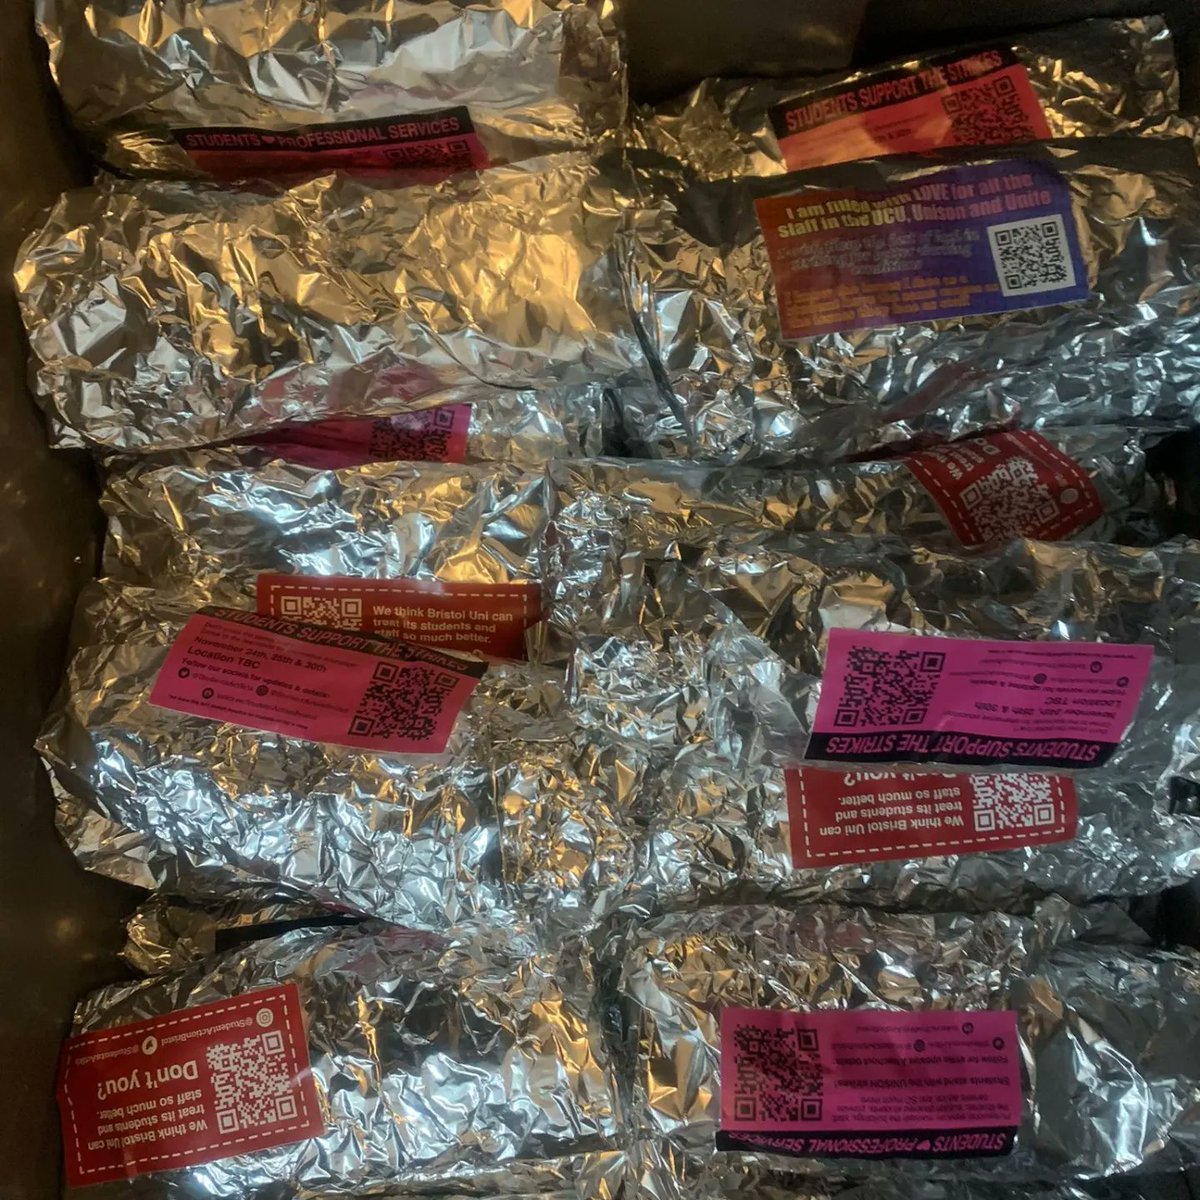 We're so excited for the teachouts tomorrow, and to be supporting the striking staff on the picket lines. We've been busy preparing wraps for our free lunch for the teachouts tomorrow See you outside the ASS at 8:45 for pickets, then in the Cube at 11 for our first session!